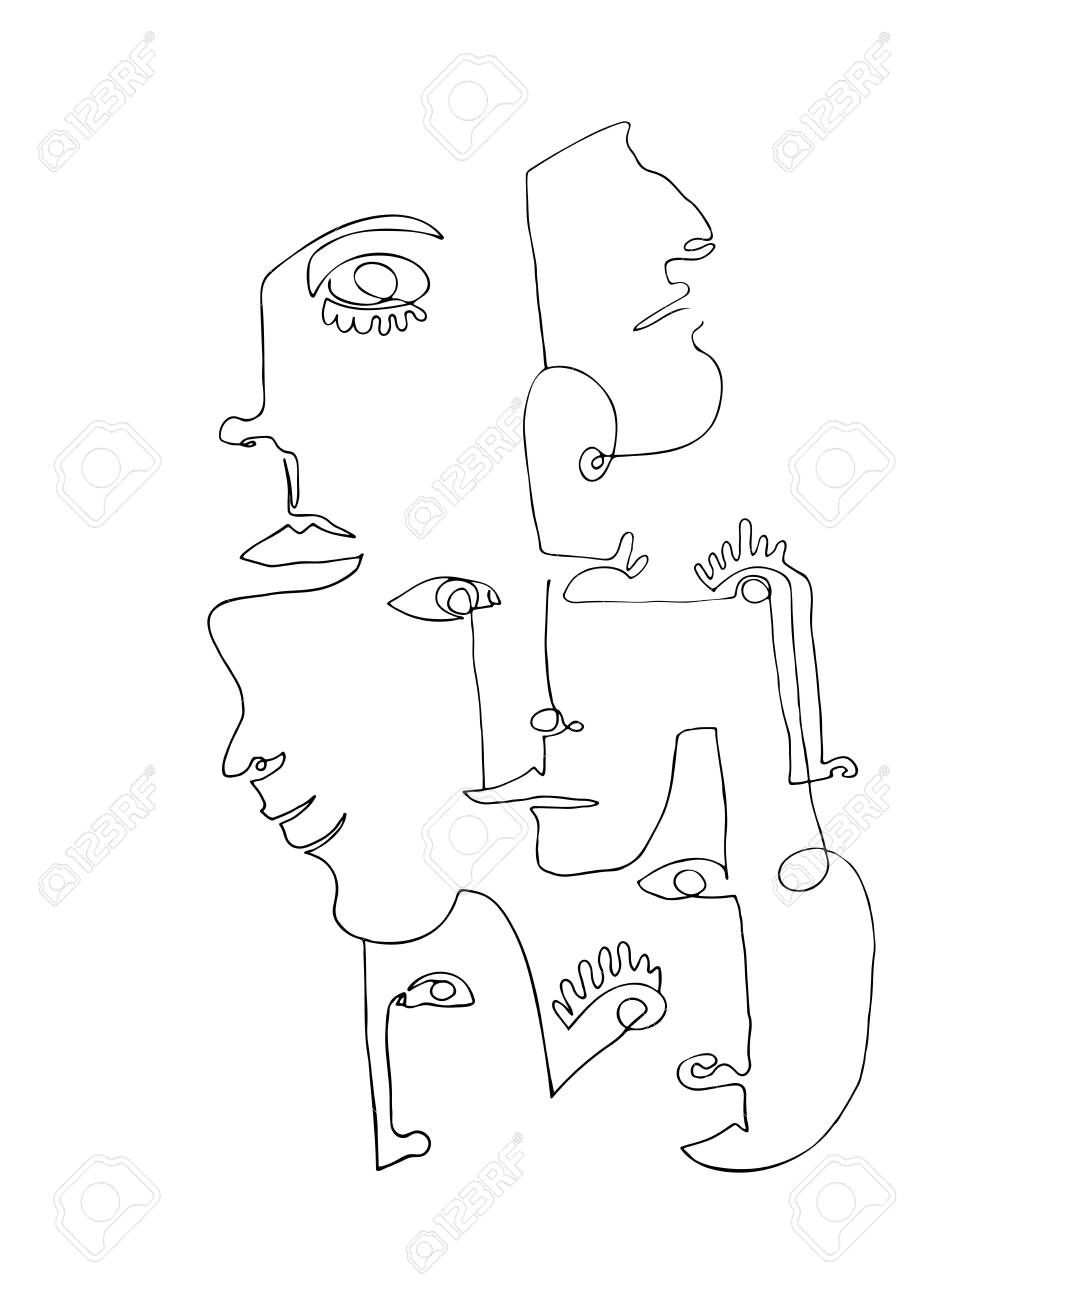 Abstract face drawing